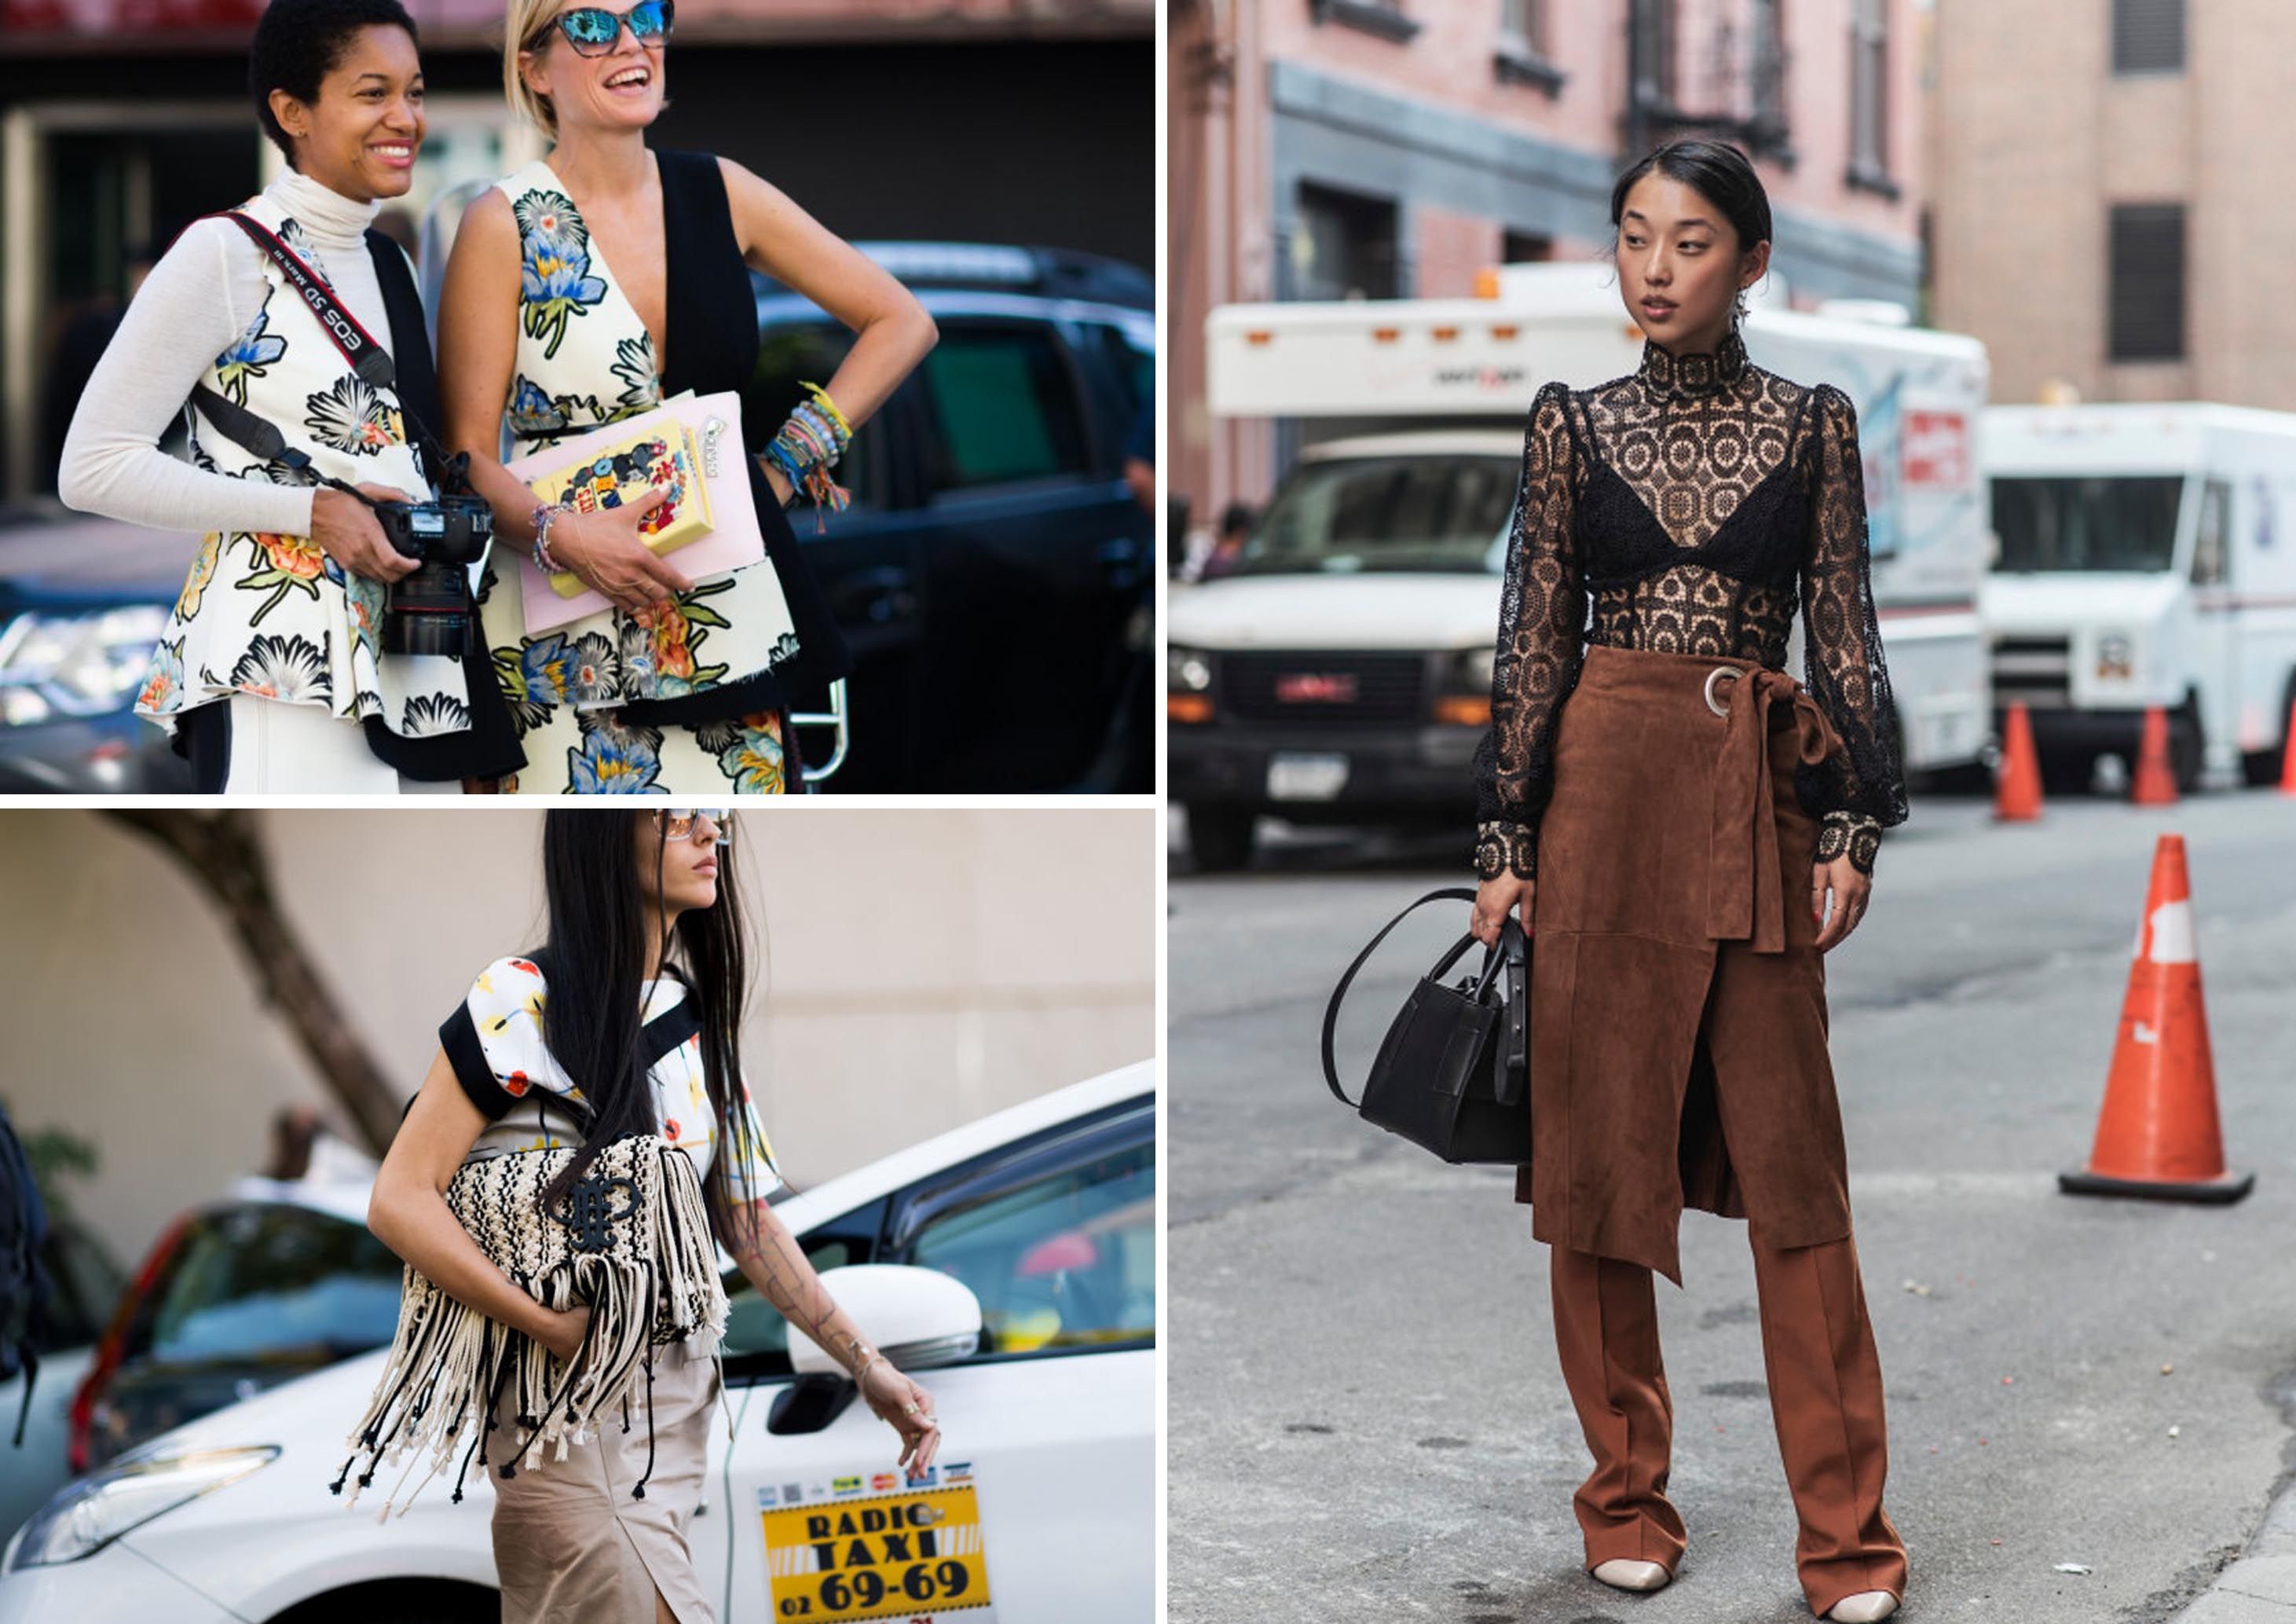 Street Style Inspiration from Fashion Week in the World's 4 Fashion Cities